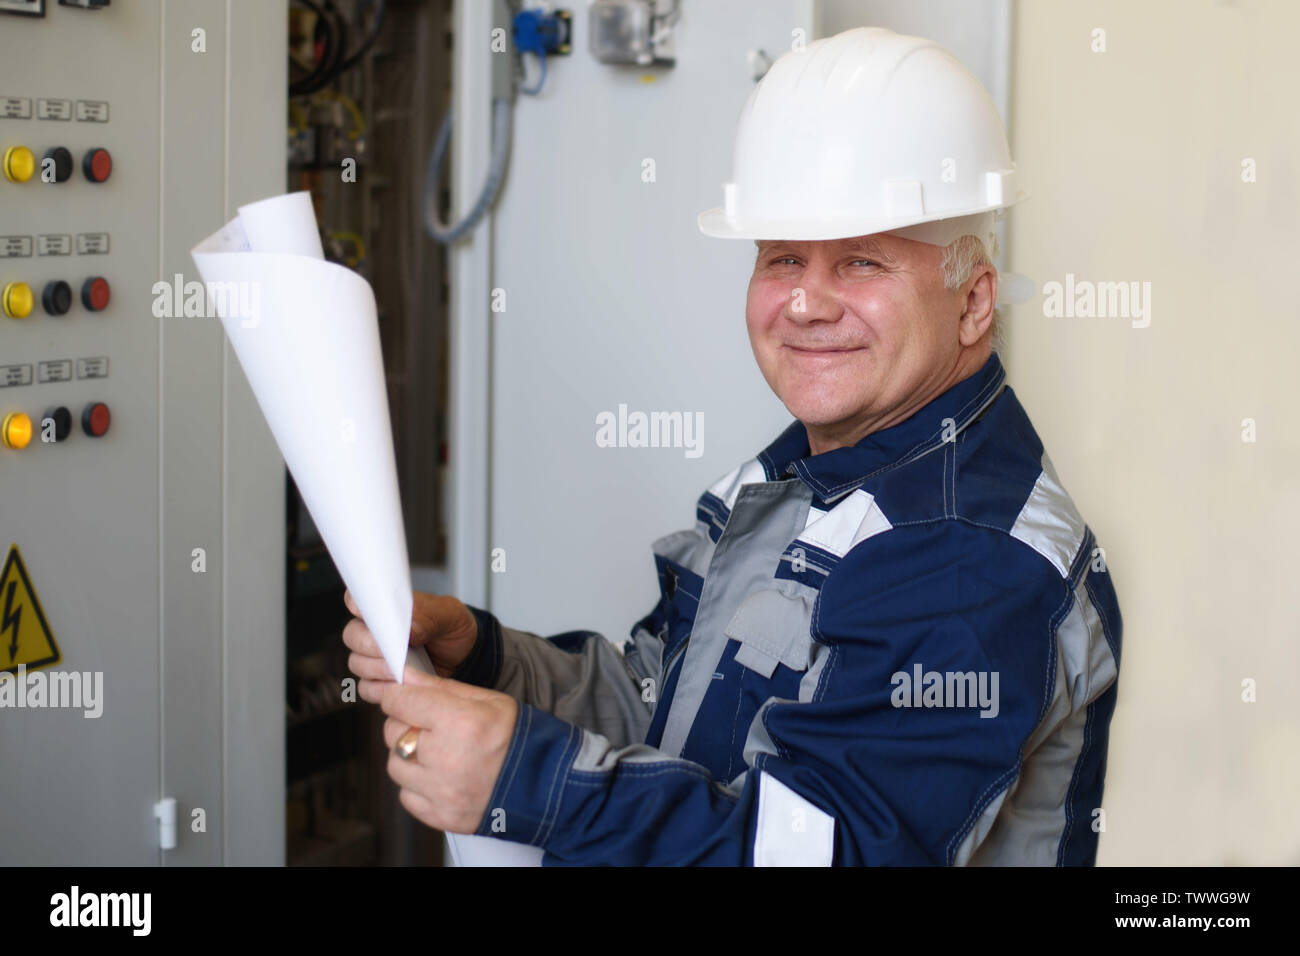 foreman electrician examines the working draft next to the dashboard. Energy and electrical safety Stock Photo